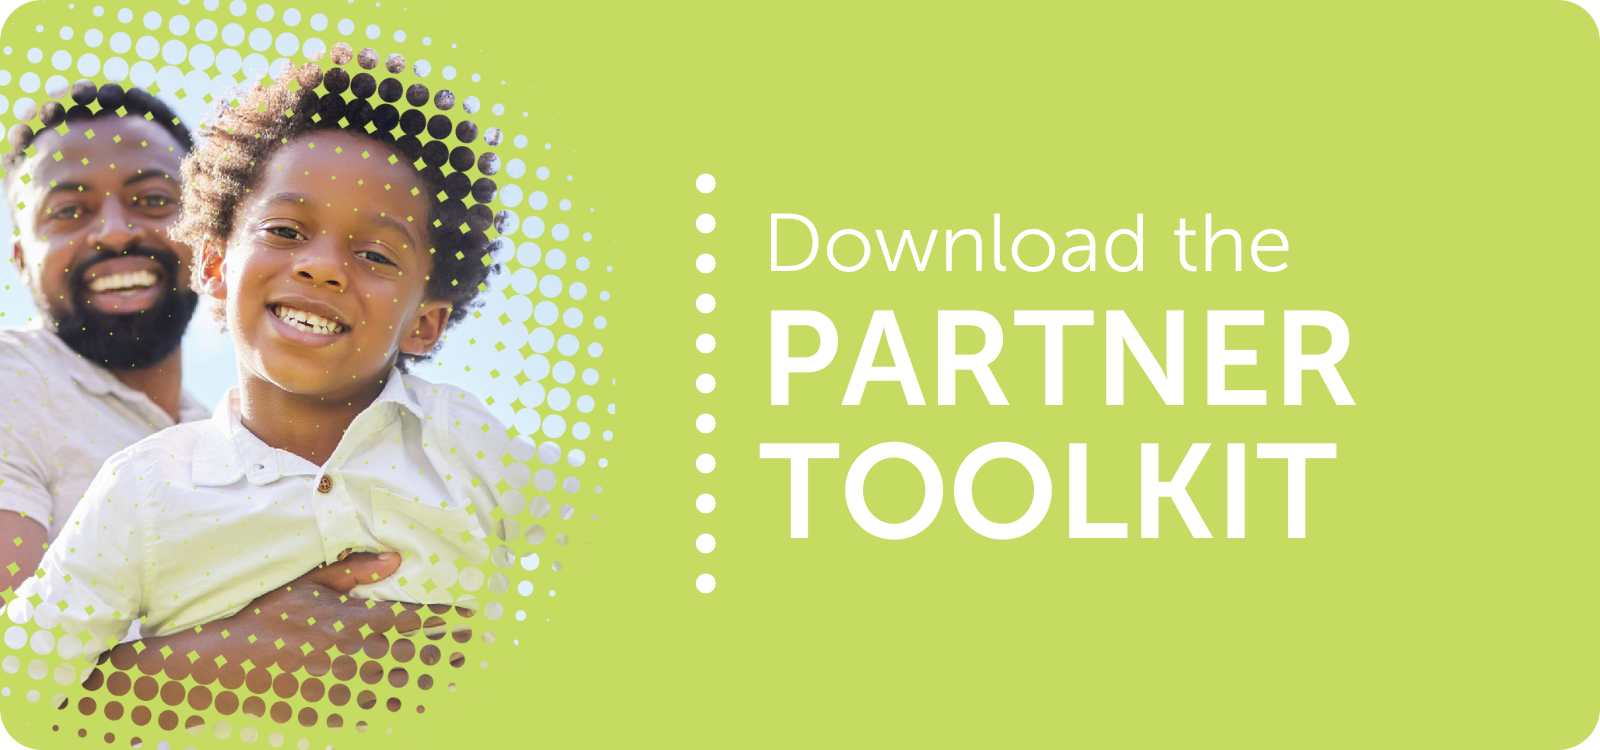 Image tile to download the Partner Toolkit